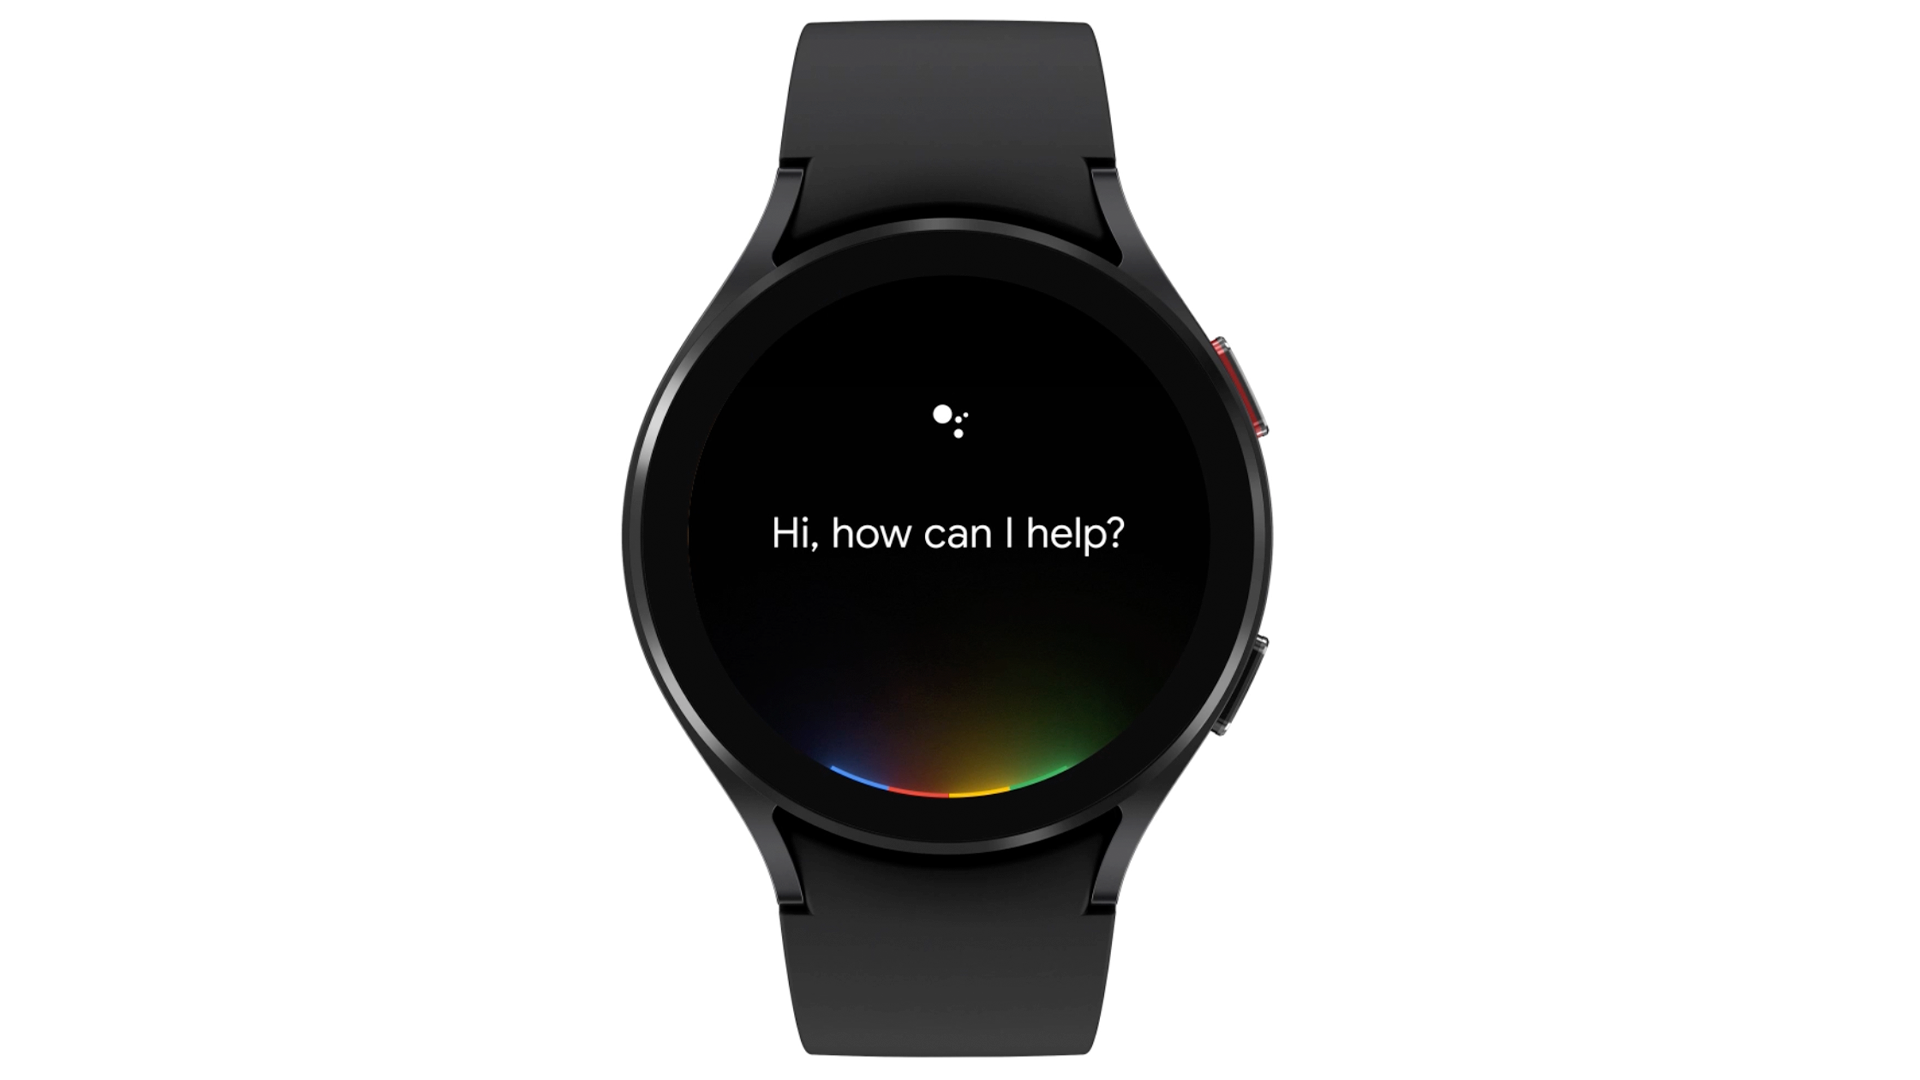 The Galaxy Watch 4 running Google Assistant